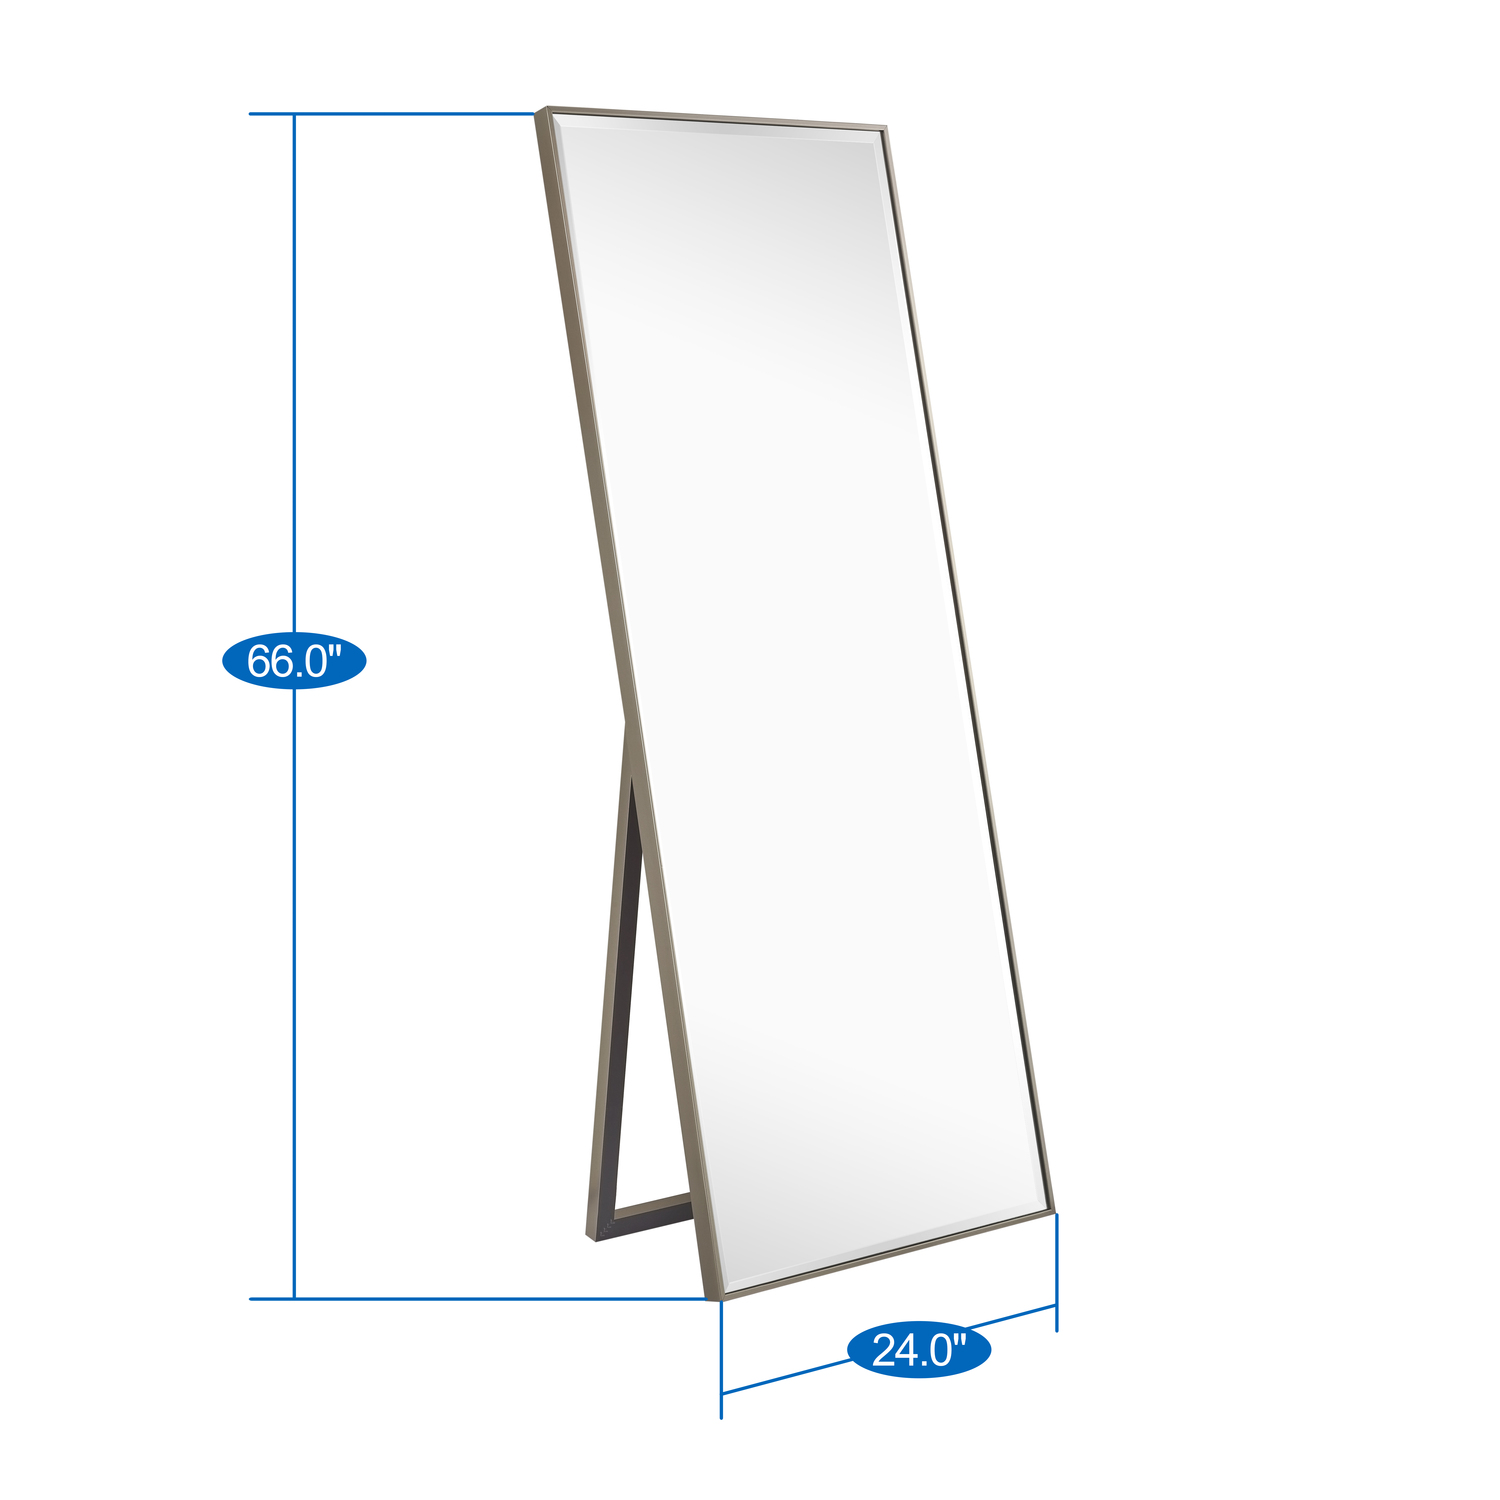 Naomi Home Modern Full Length Mirror, Large Freestanding Floor/Wall Mirror, Full Body Dressing Mirror for Bedroom, Living Room, Office - 66" x 24", Silver - image 4 of 7